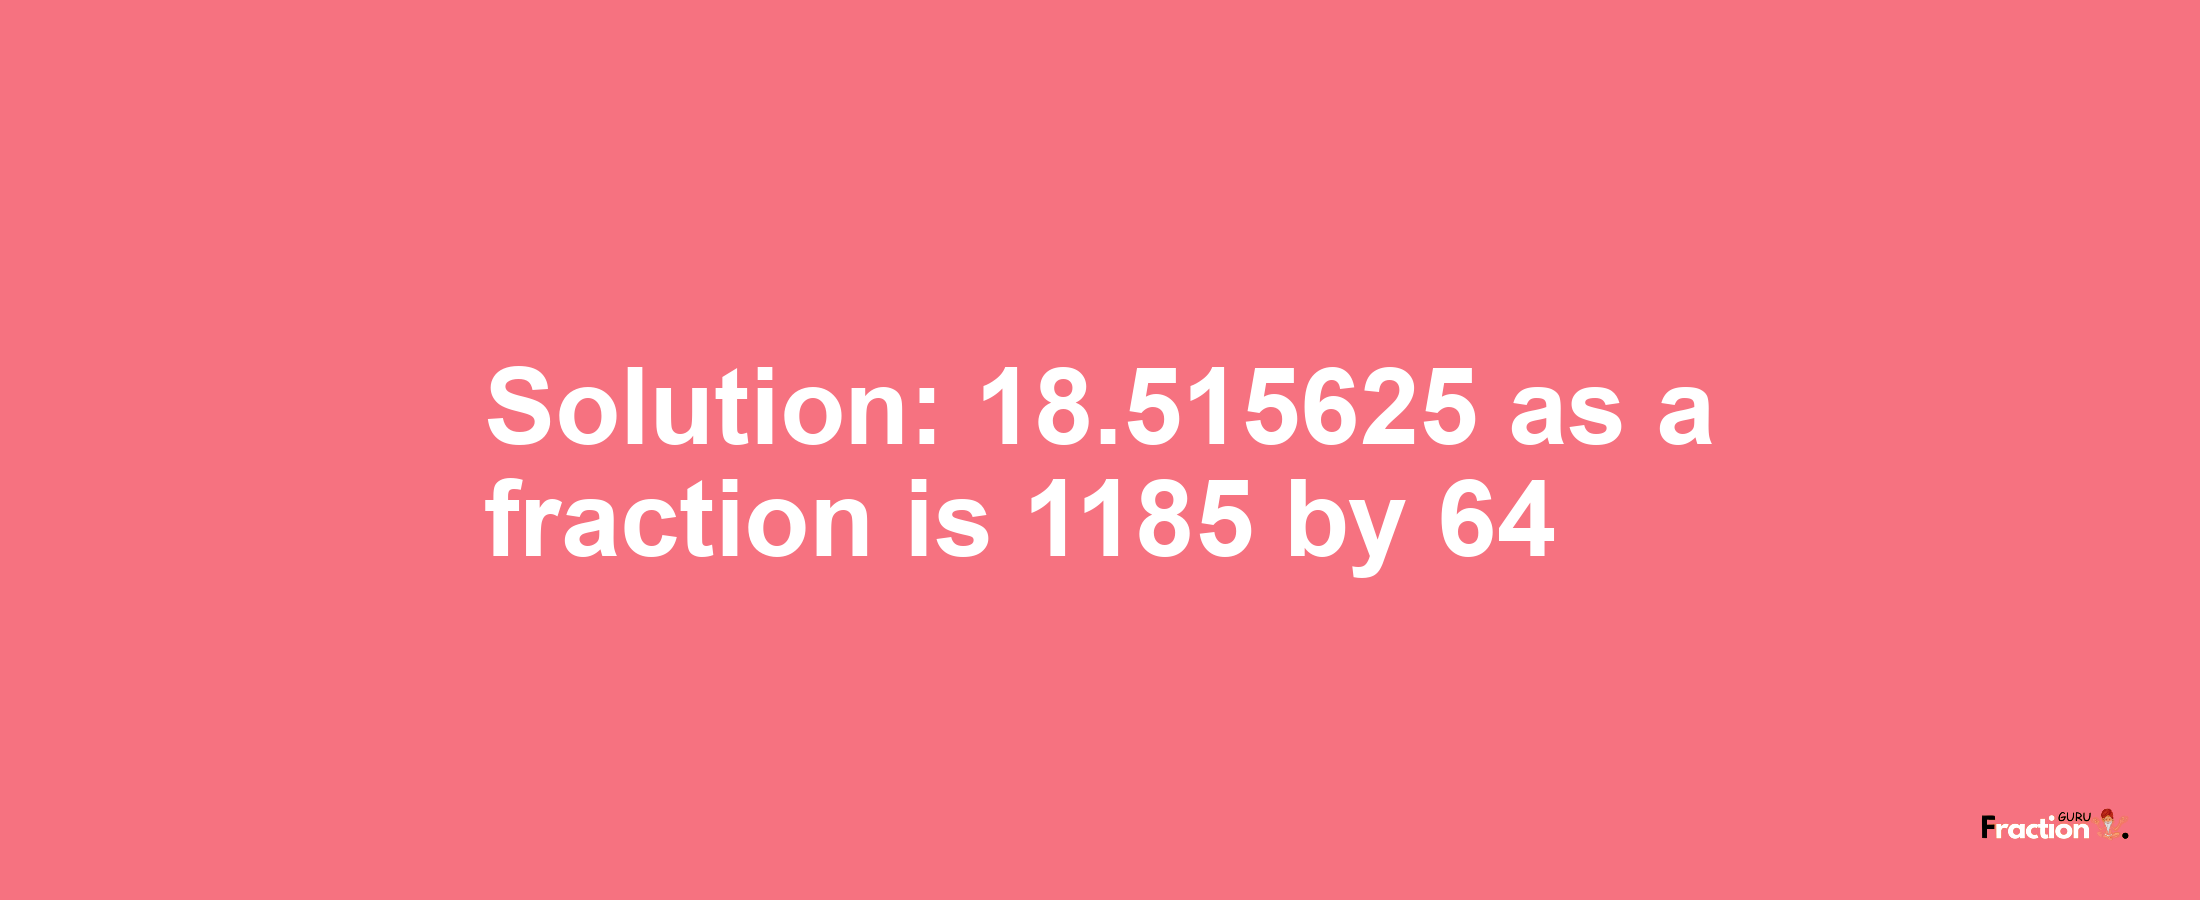 Solution:18.515625 as a fraction is 1185/64